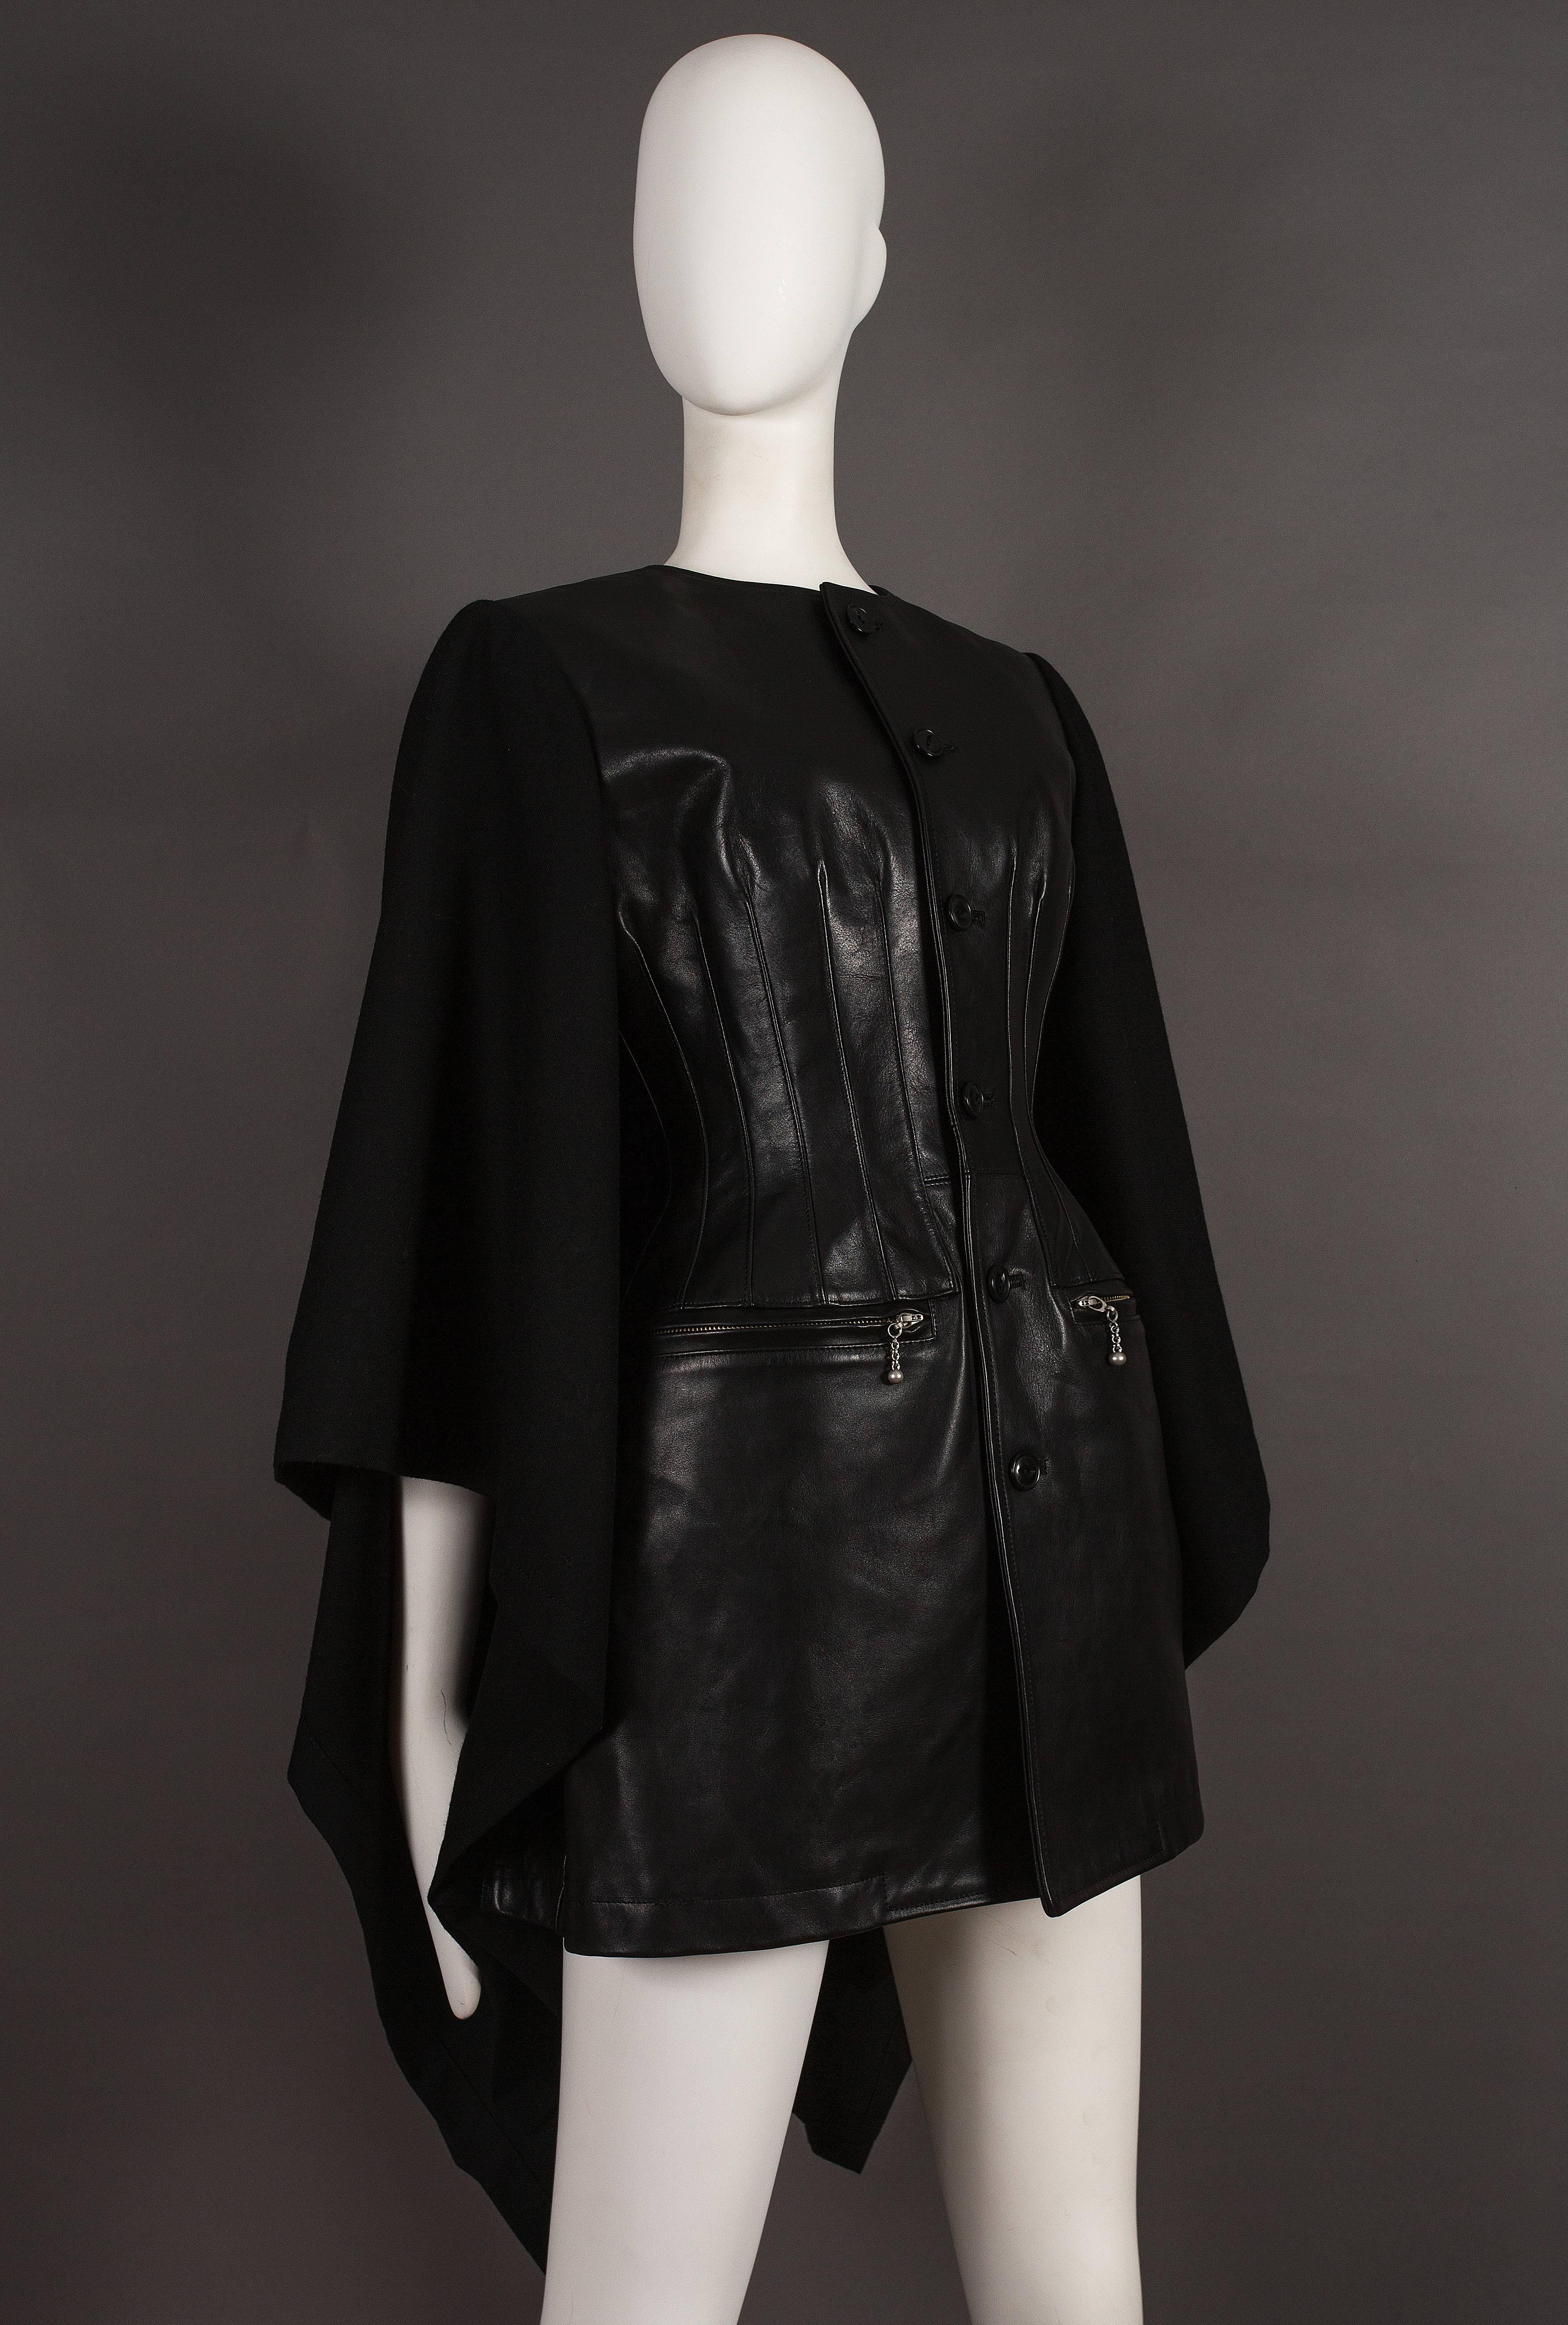 Women's Junya Watanabe Comme des Garcons black leather jacket with wool cape, circa 2011